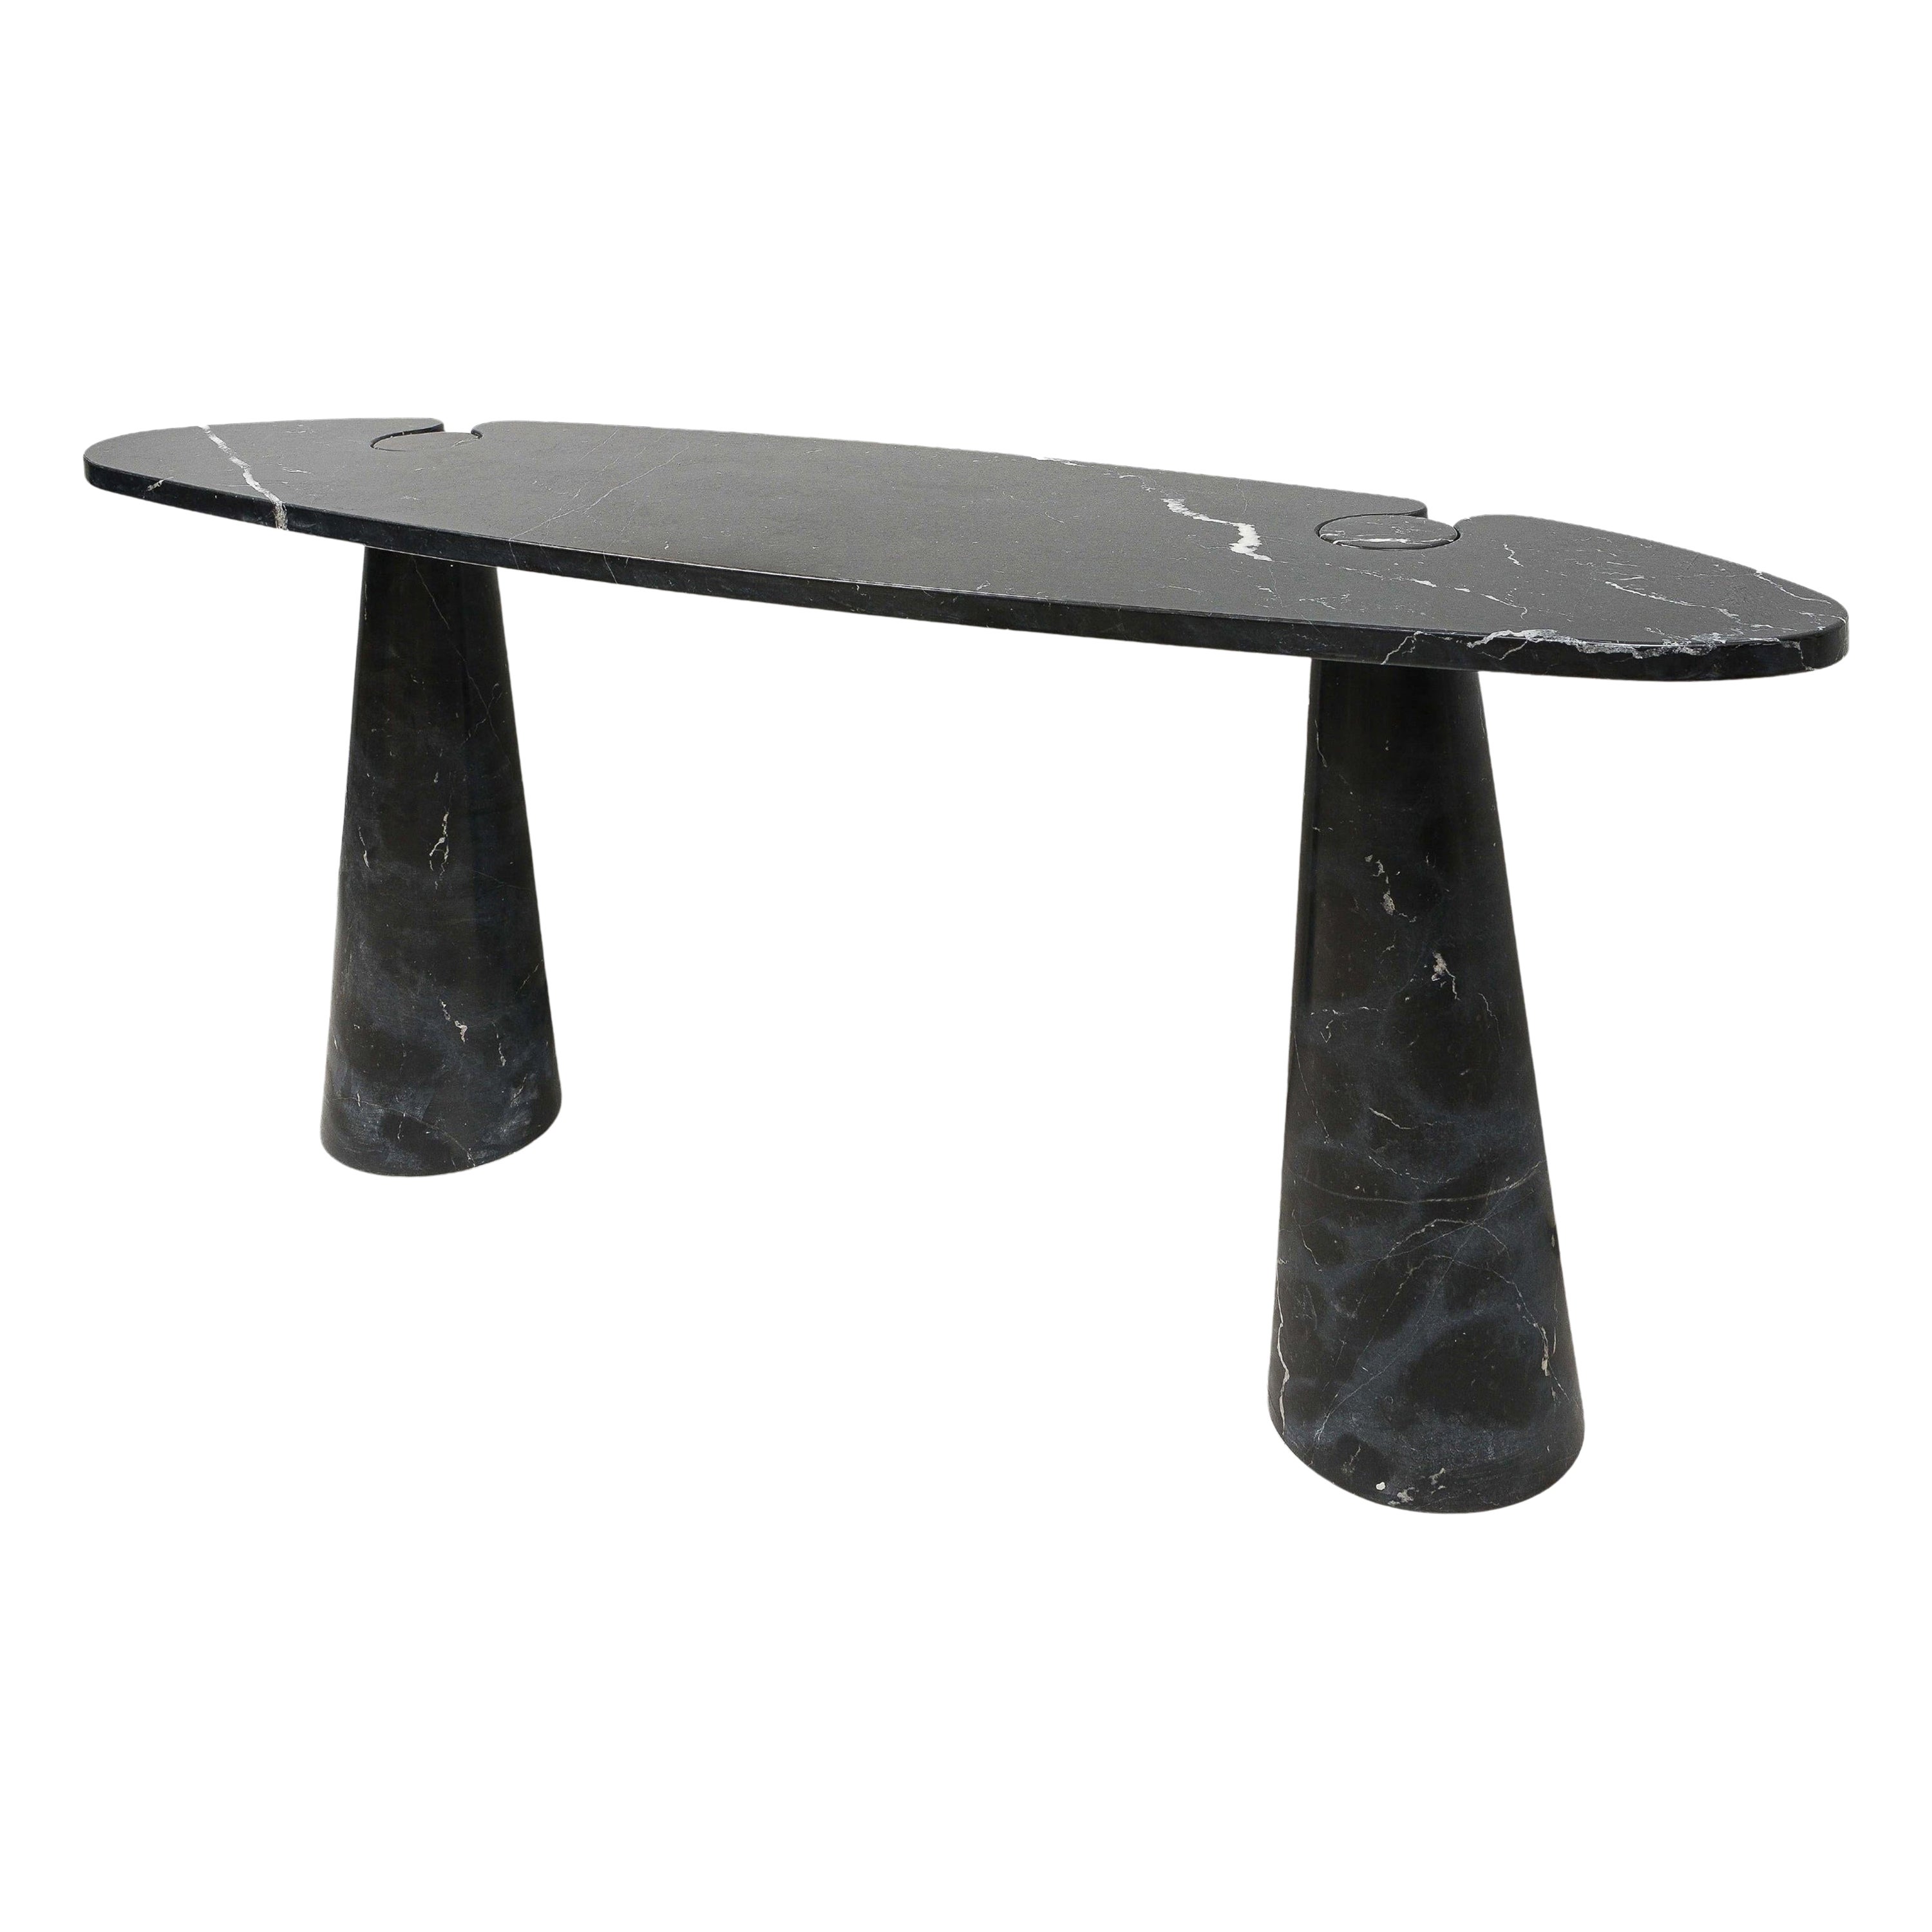 Angelo Mangiarotti Console Table from the "Eros" Series